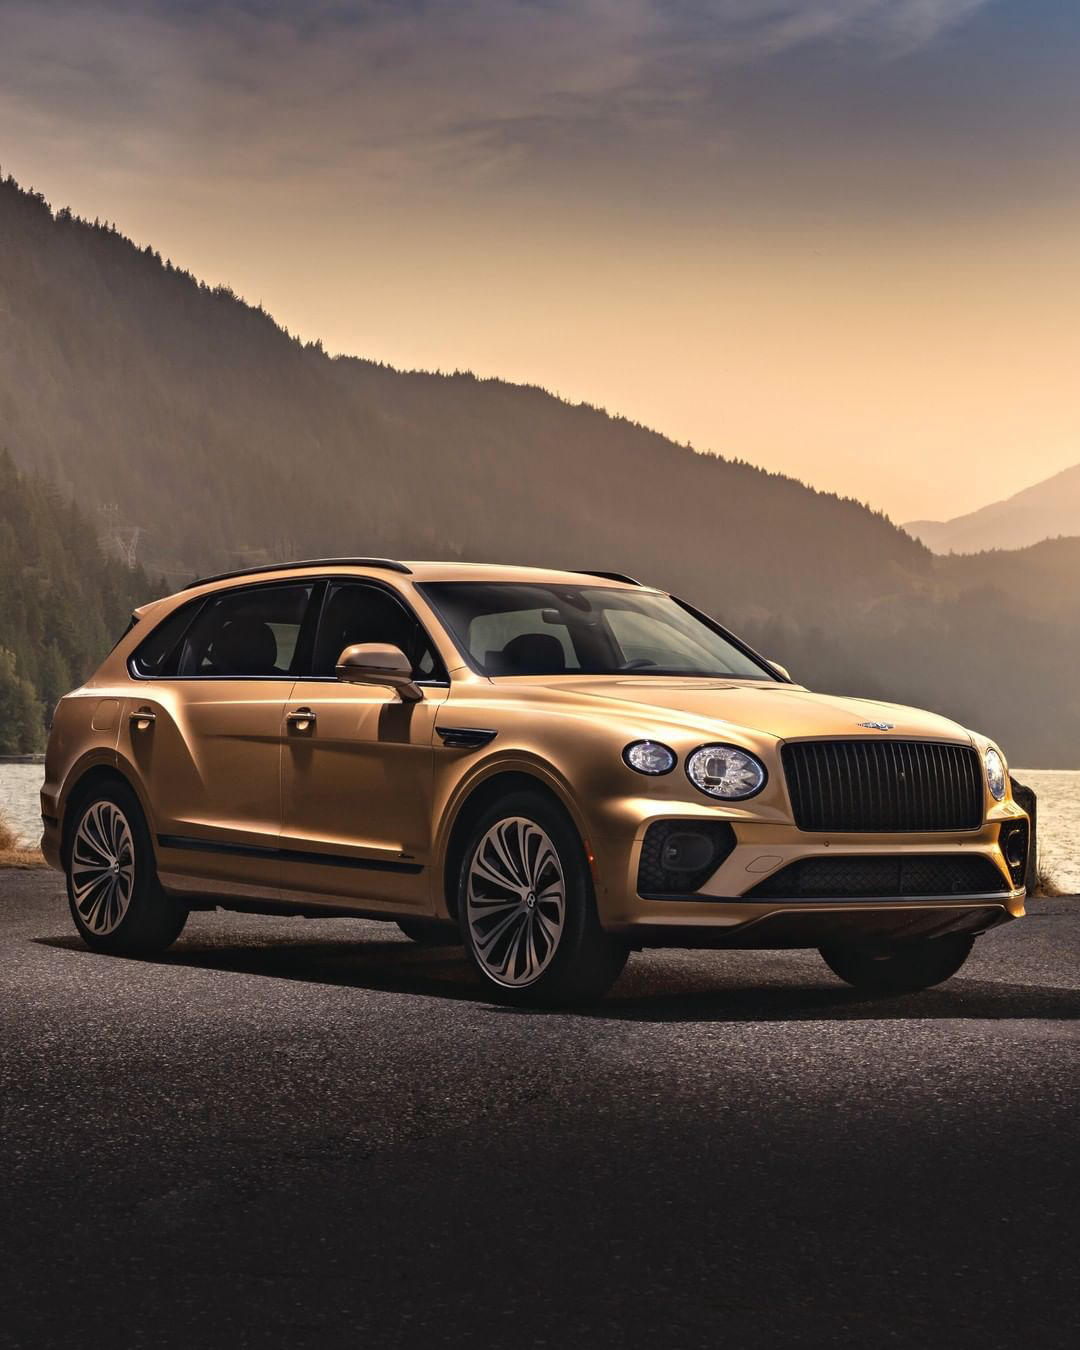 image  1 Bentley Motors - “The attention paid to the quality of the leather, the knurling on some of the swit